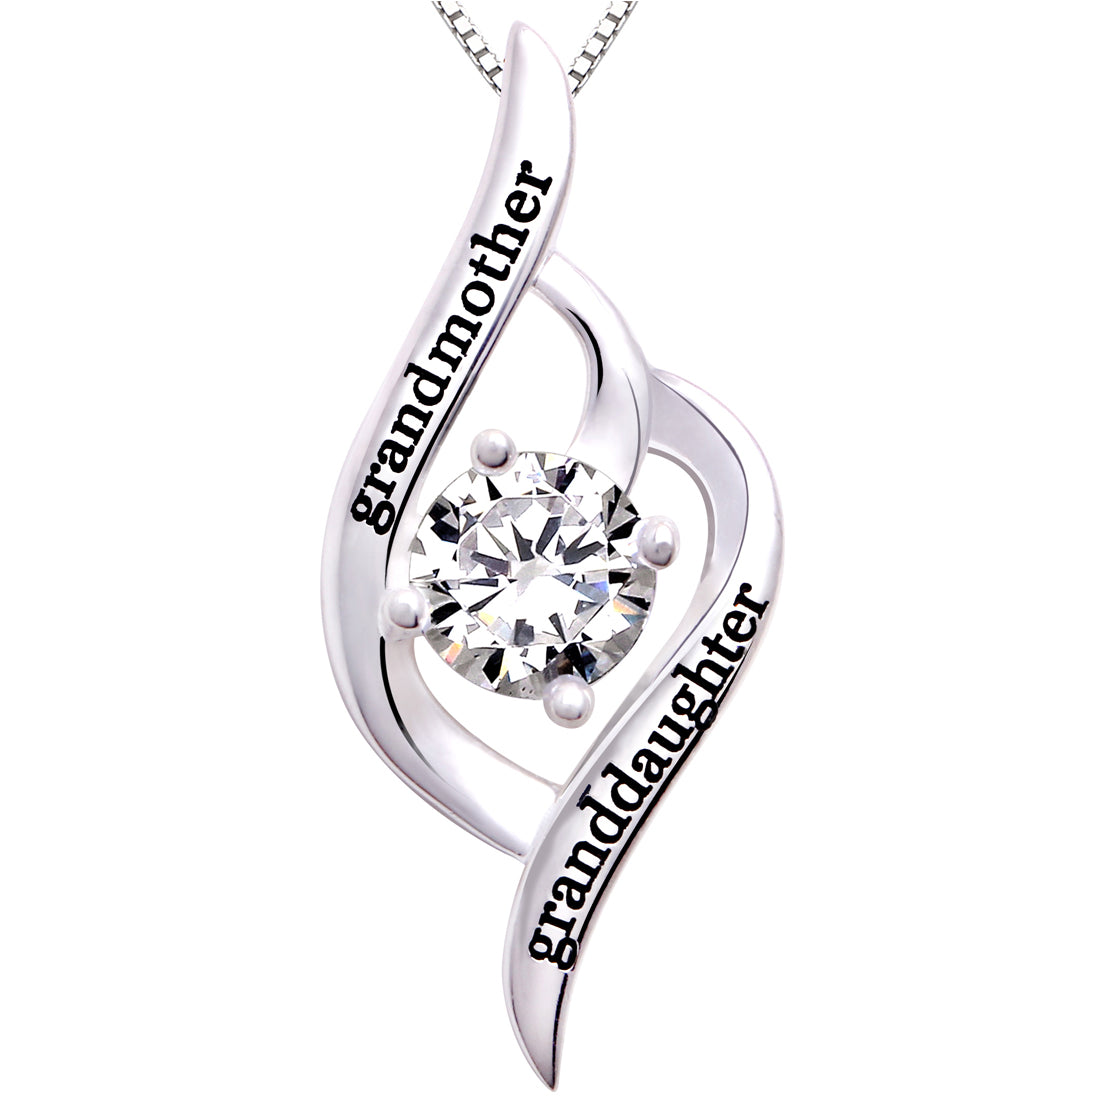 ALOV Jewelry Sterling Silver "grandmother granddaughter" Love Cubic Zirconia Pendant Necklace